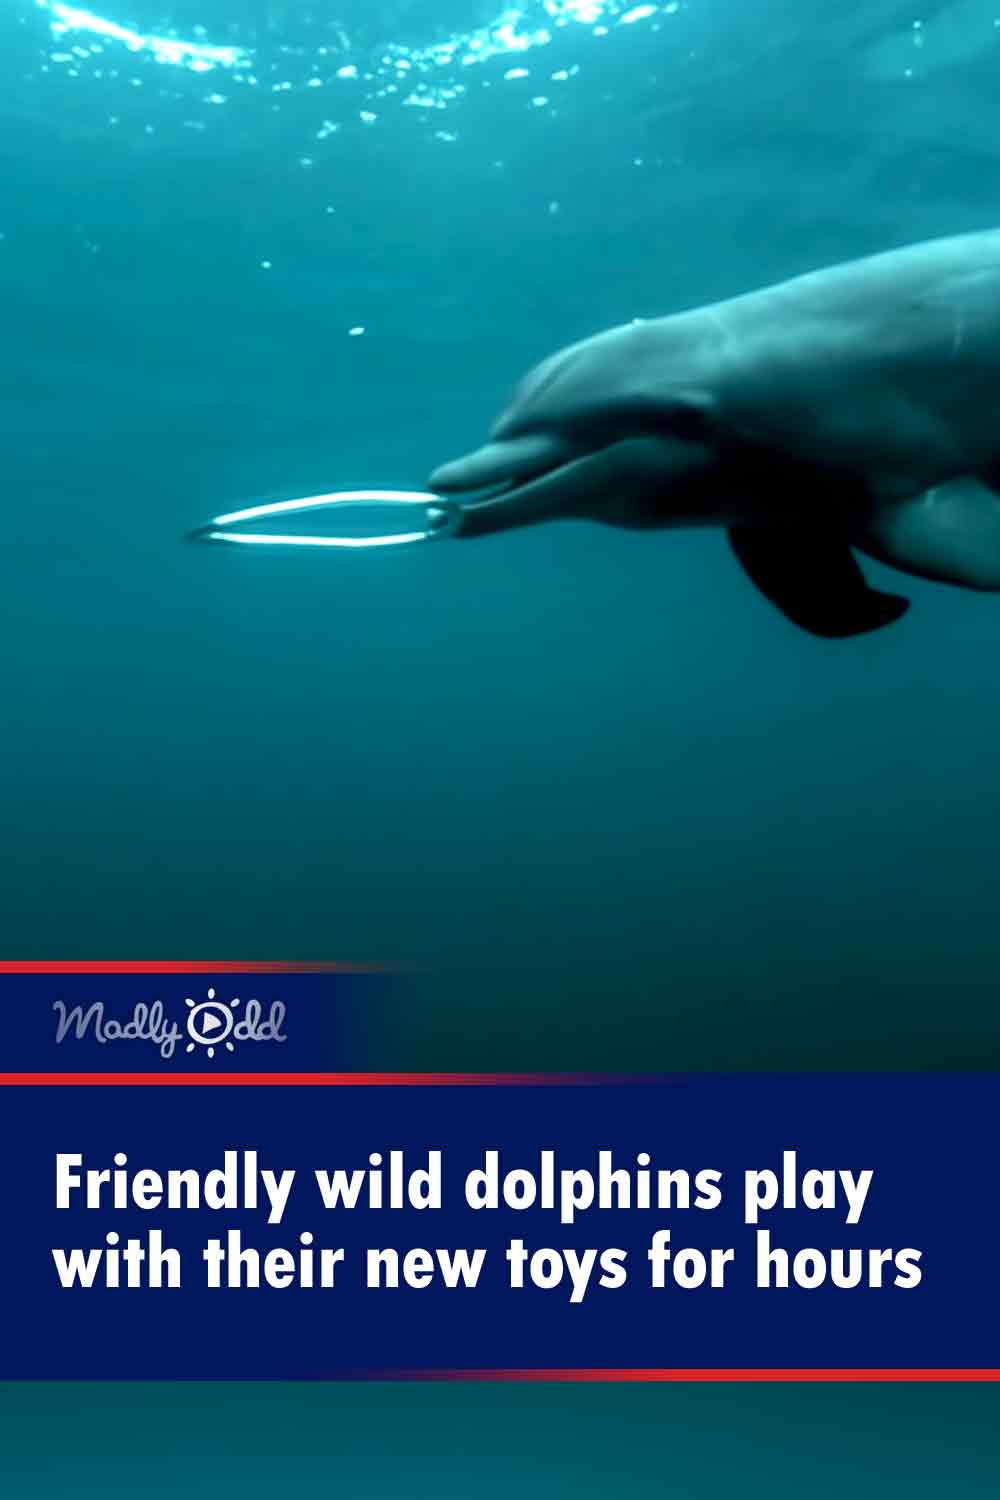 Friendly wild dolphins play with their new toys for hours